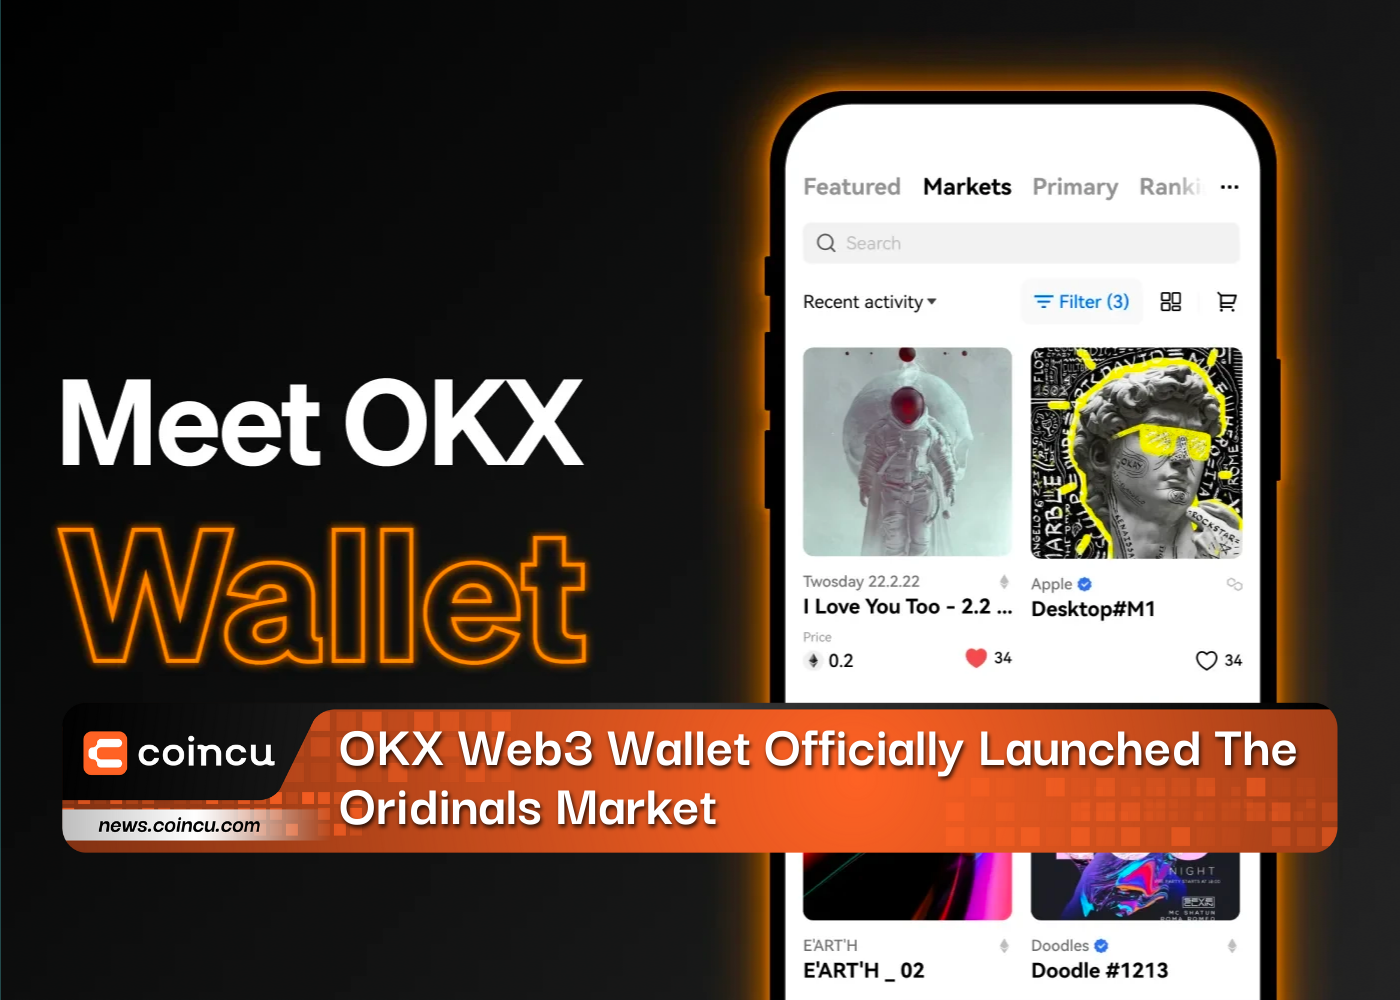 OKX Web3 Wallet Officially Launched The Oridinals Market